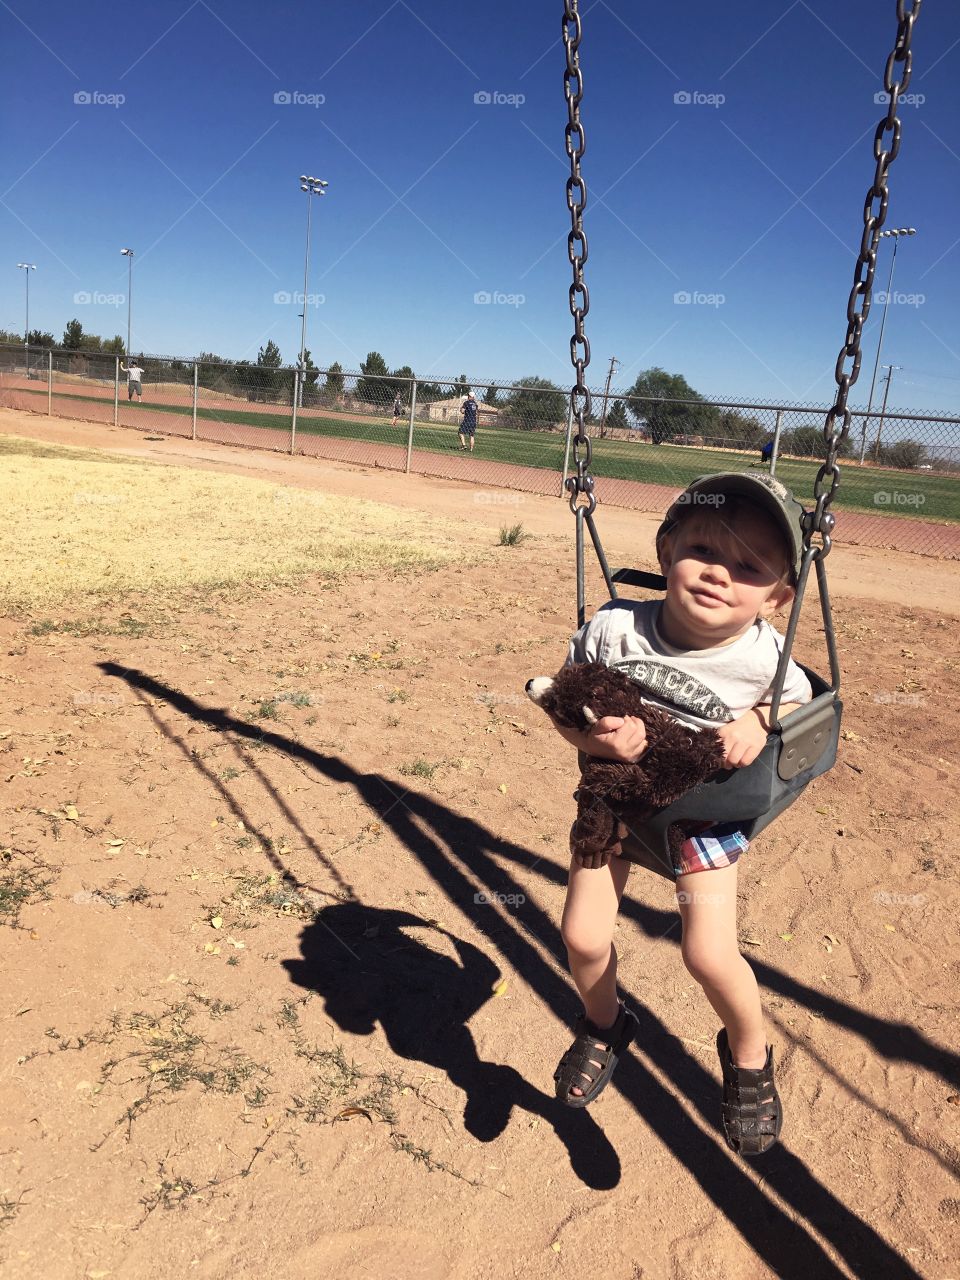 Toddler boy in infant swing on playground